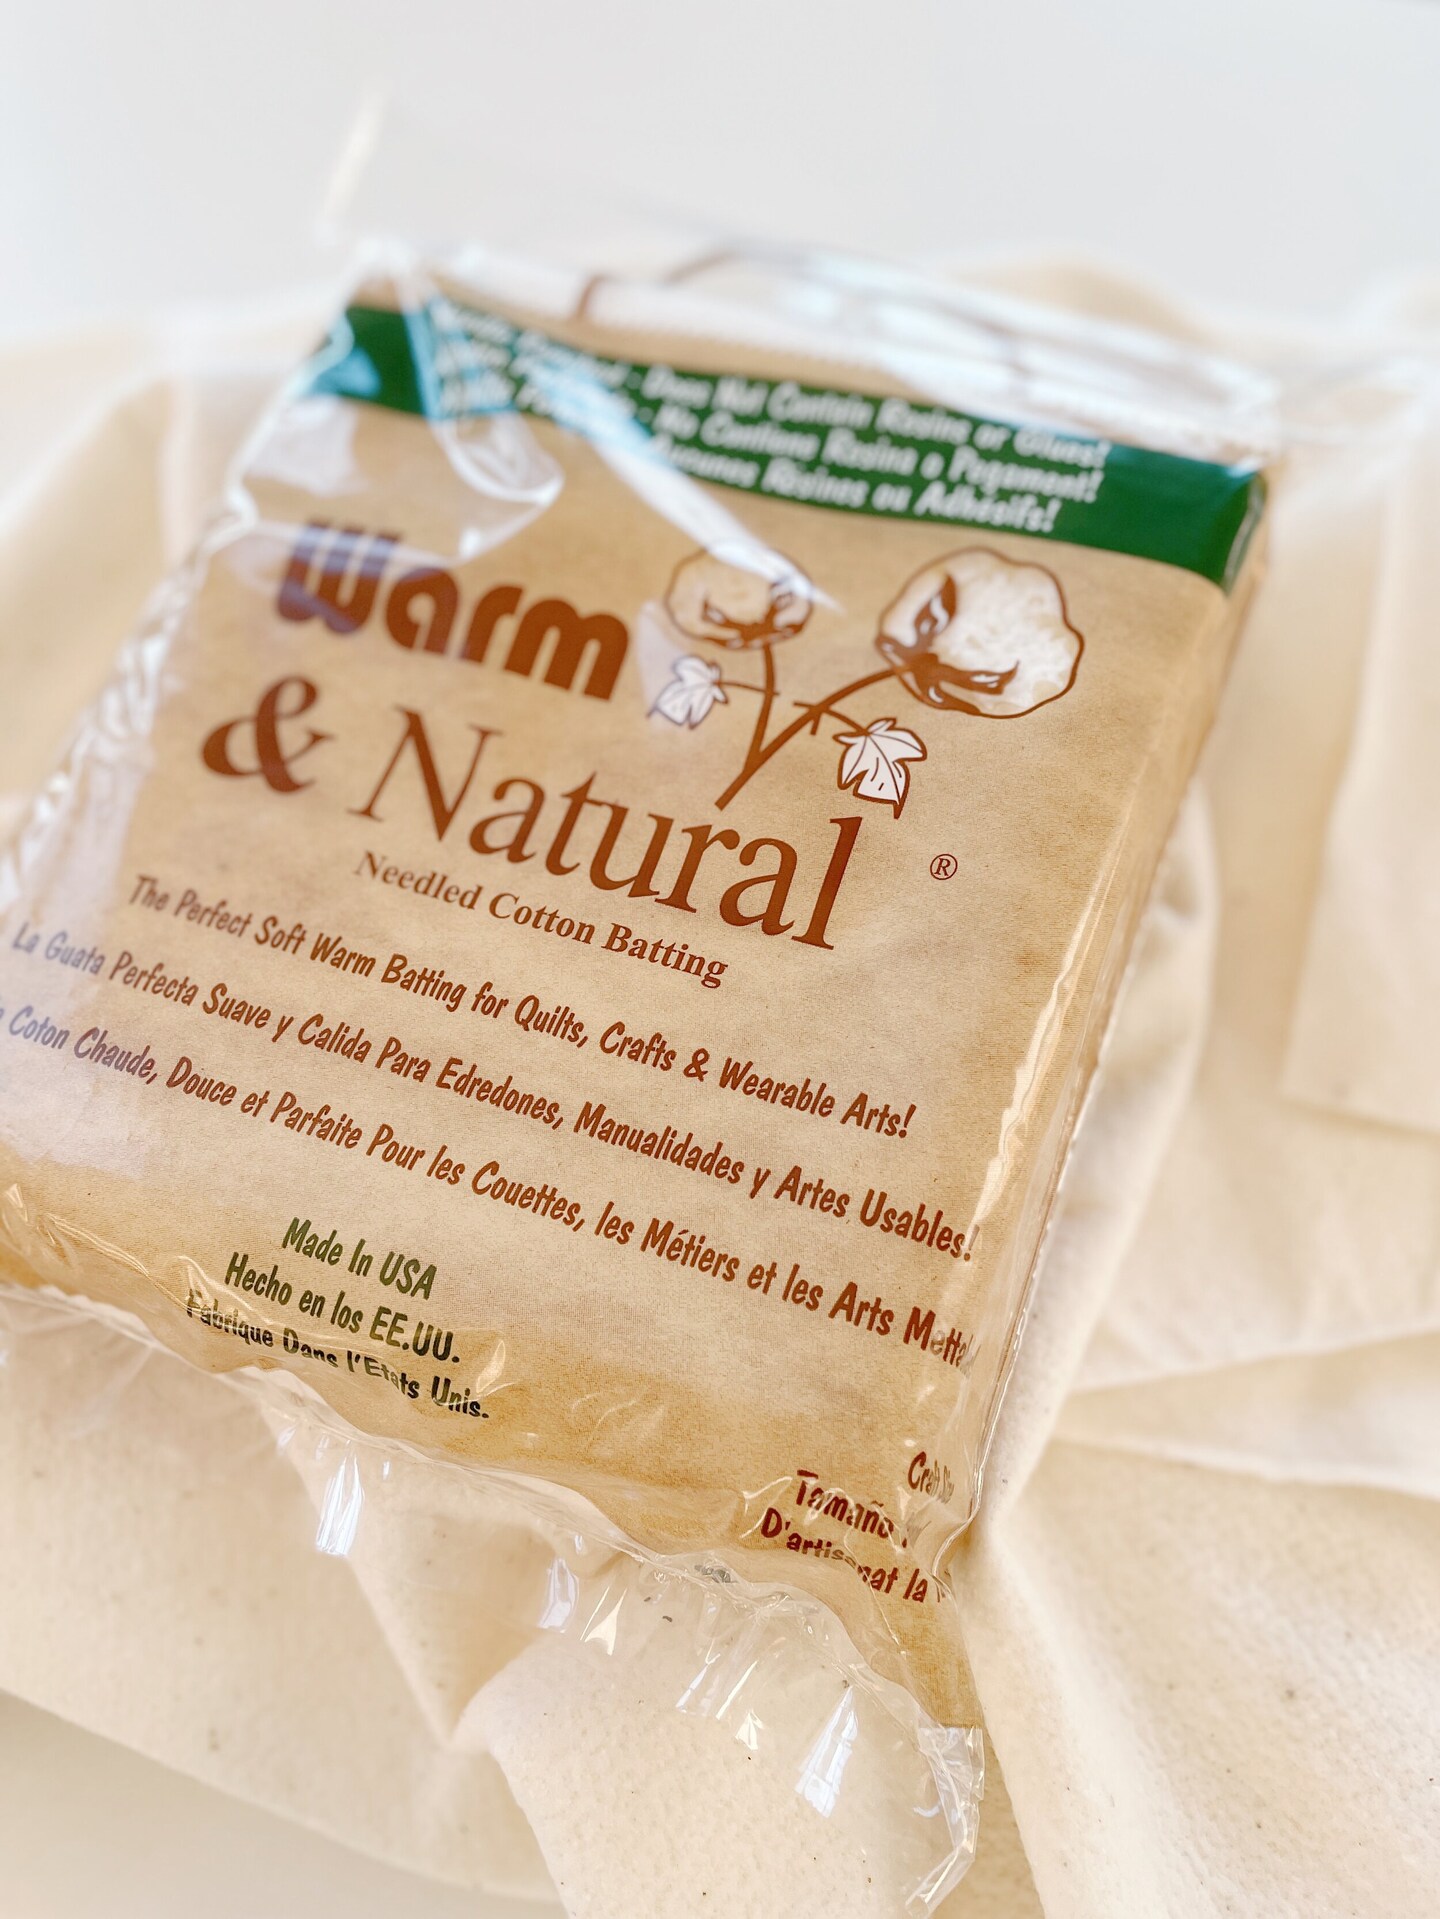 Natural Cotton Batting for Quilts / Warm & Natural® -- Craft Size